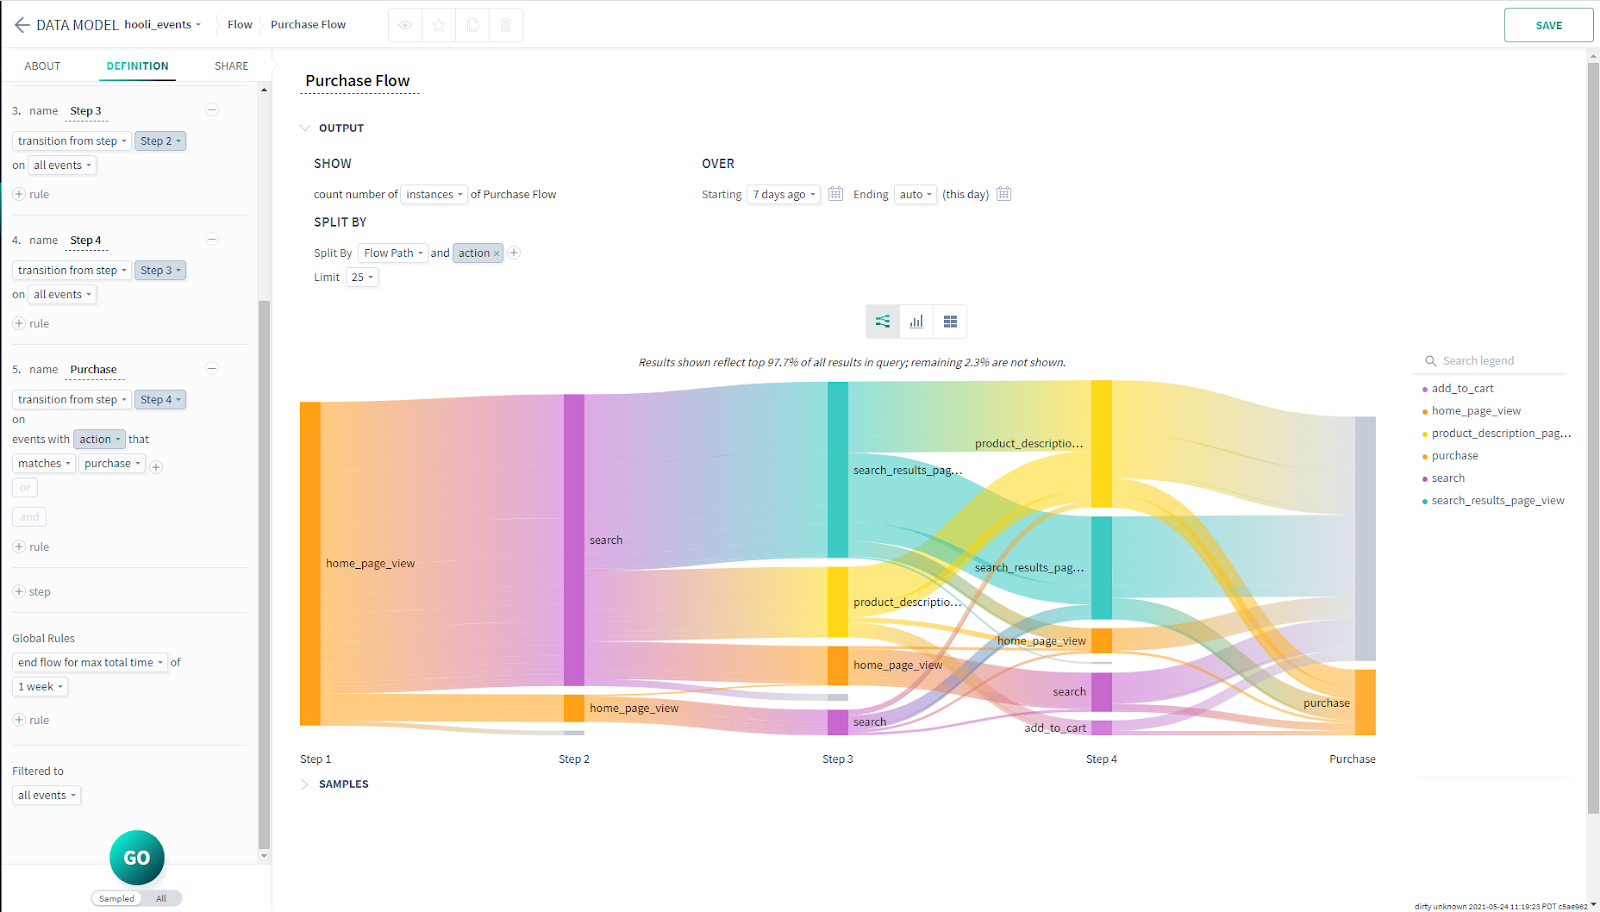 Funnel Visualization - Purchase flow